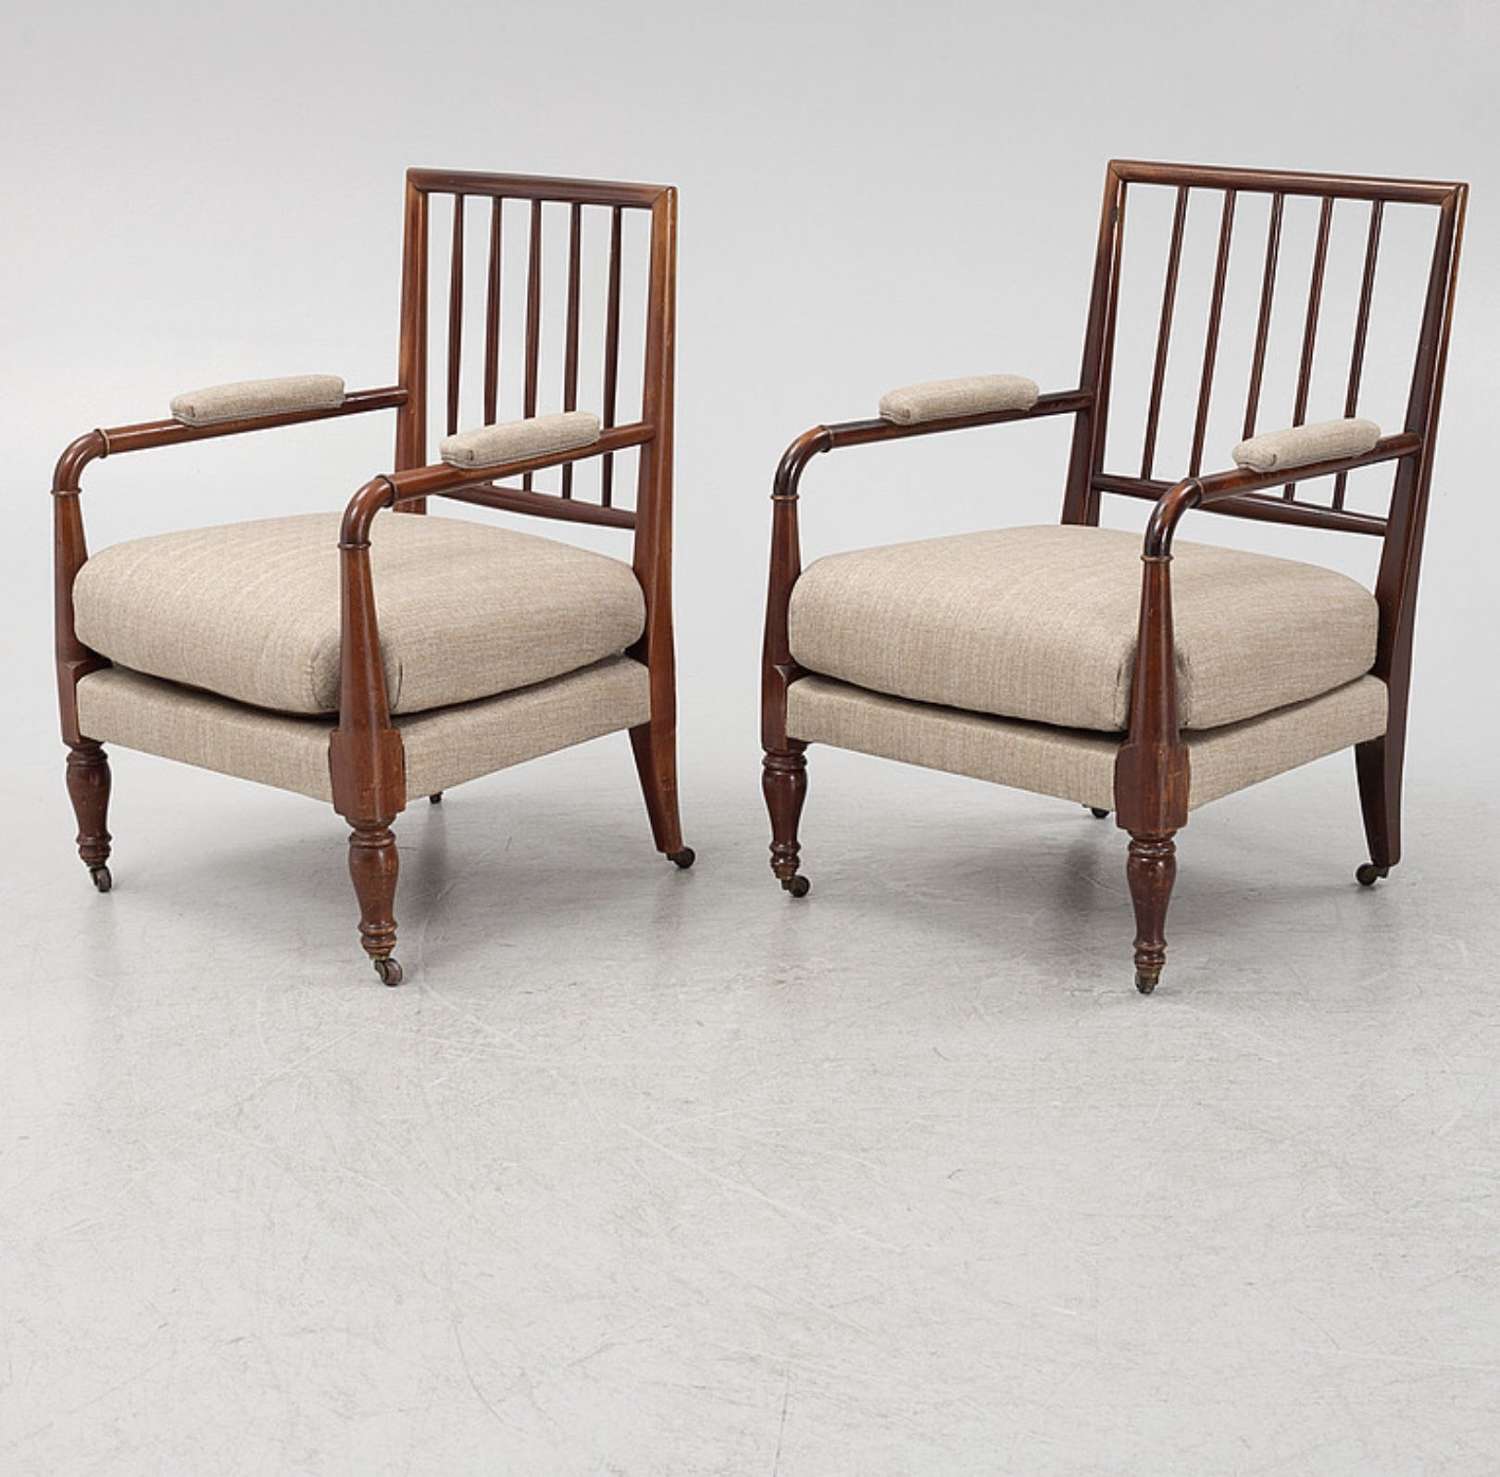 C1900s pair of spindle back upholstered mahogany Swedish armchairs